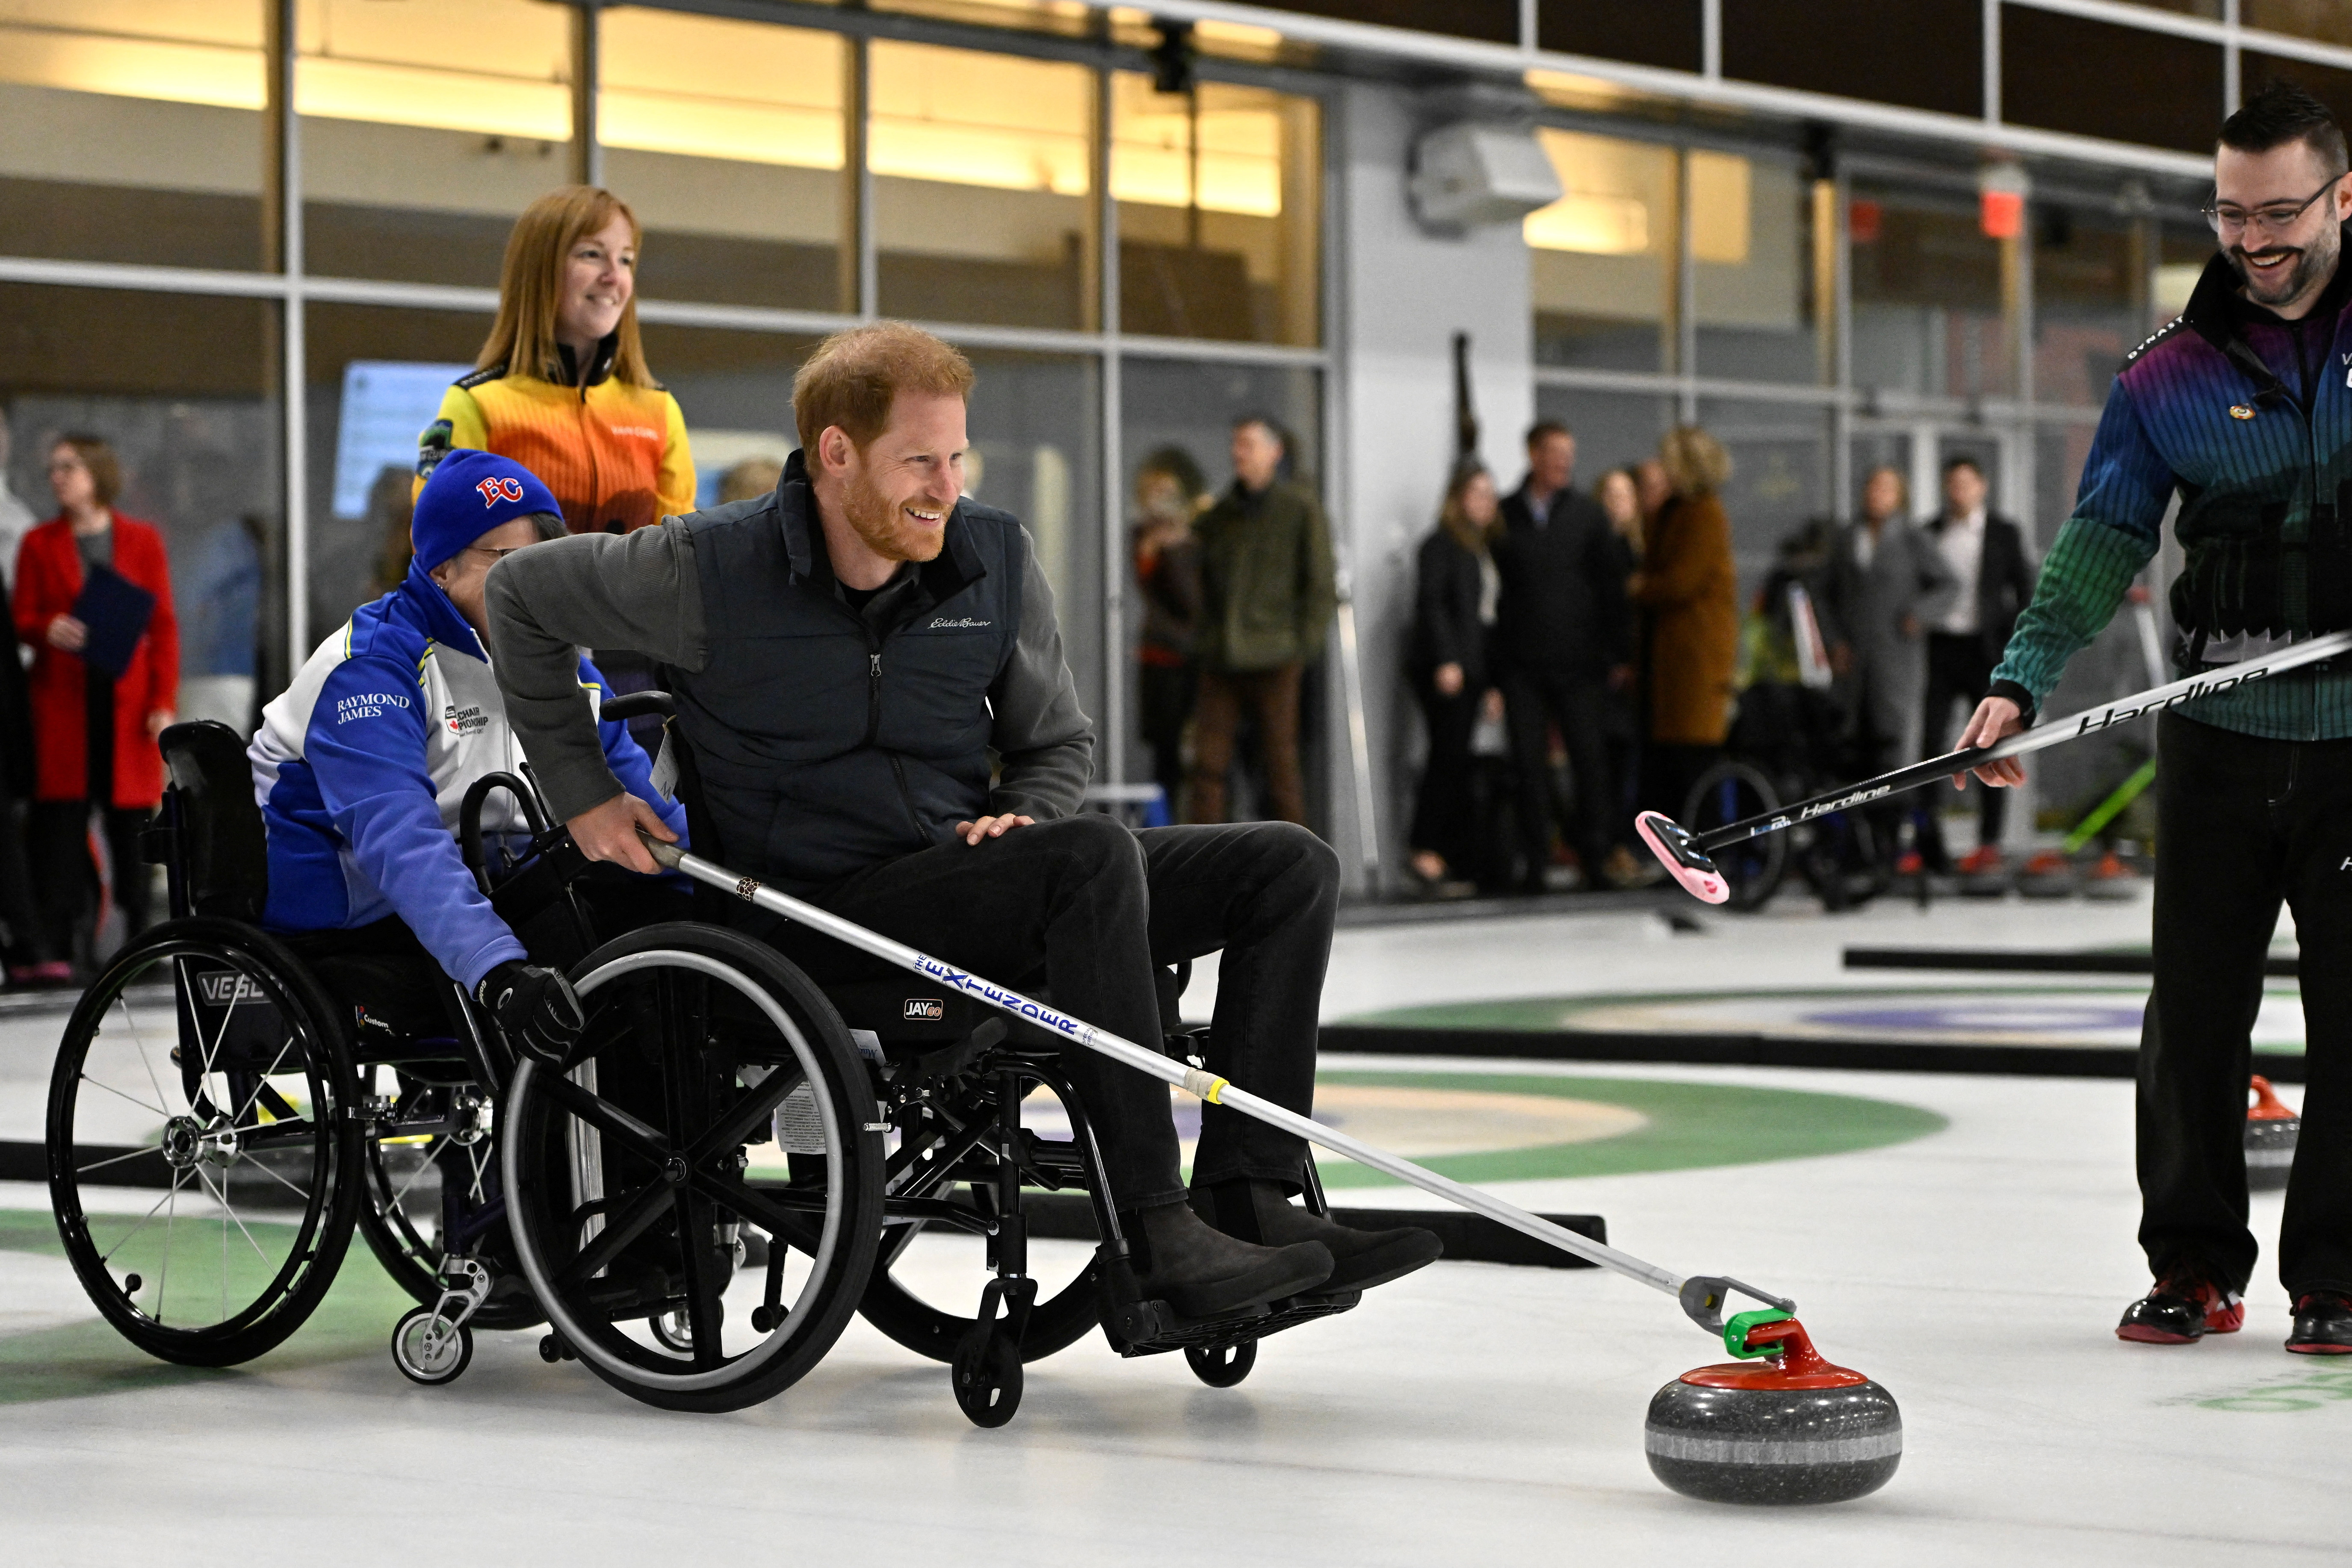 The Duke and Duchess of Sussex visit the training camp in Vancouver for the Invictus Games Vancouver Whistler 2025